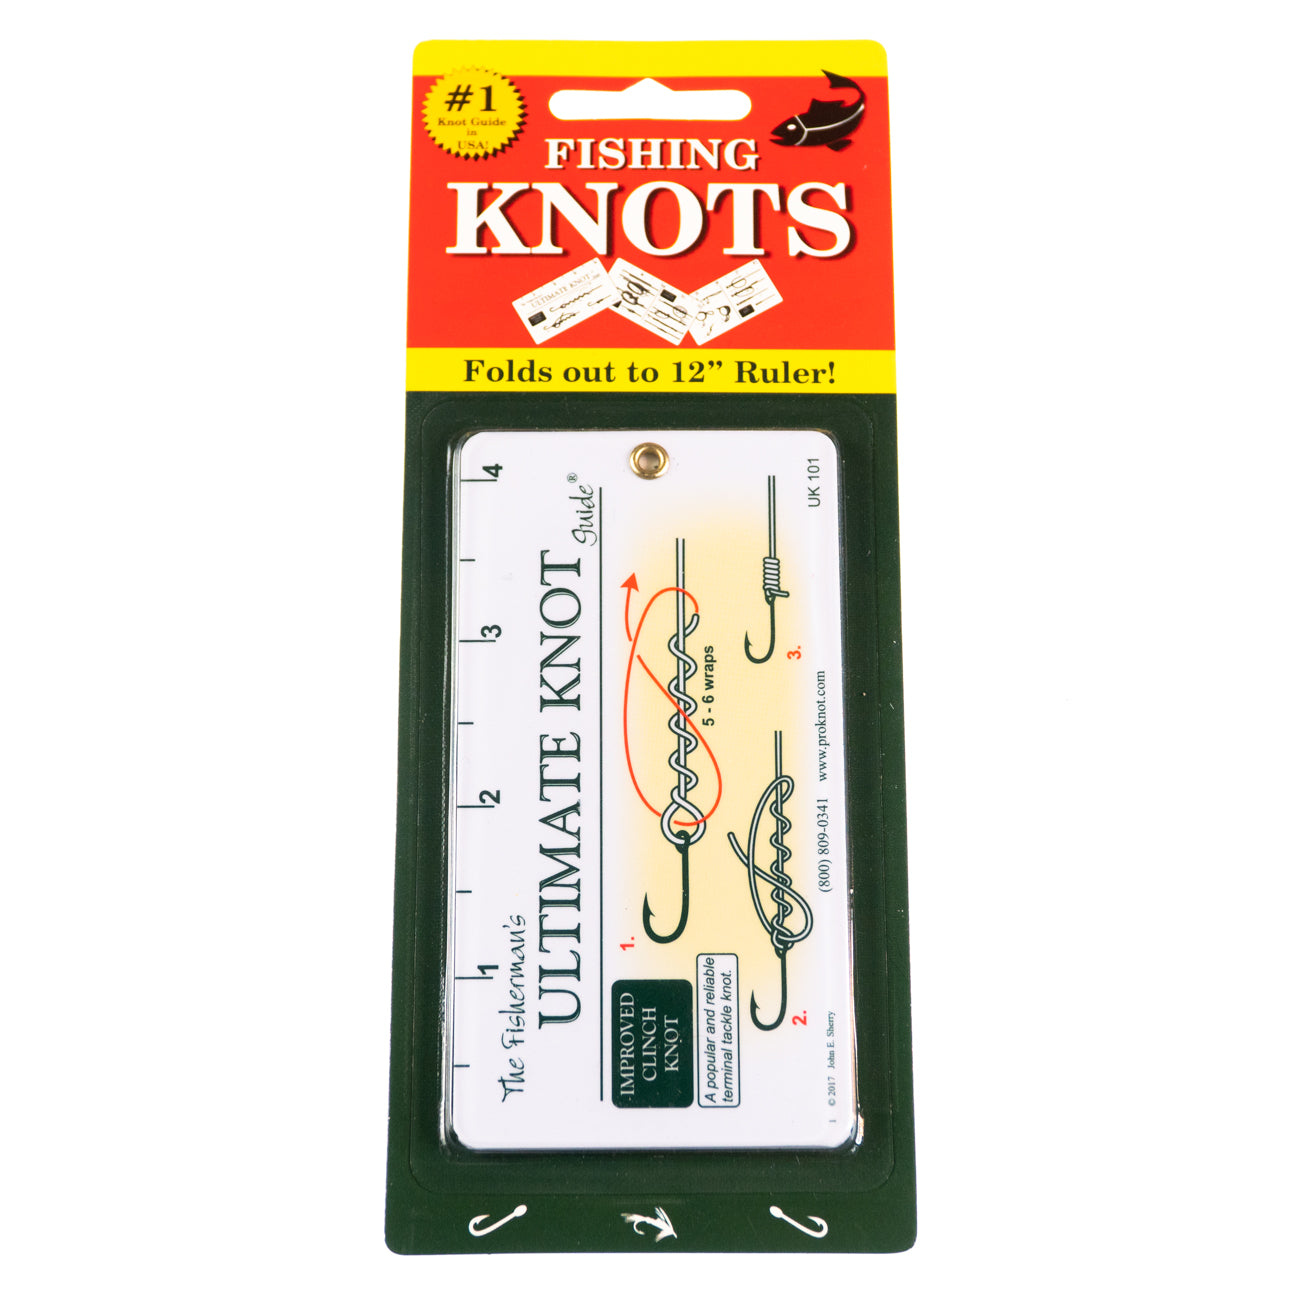 Ultimate Knot Fisherman's Guide